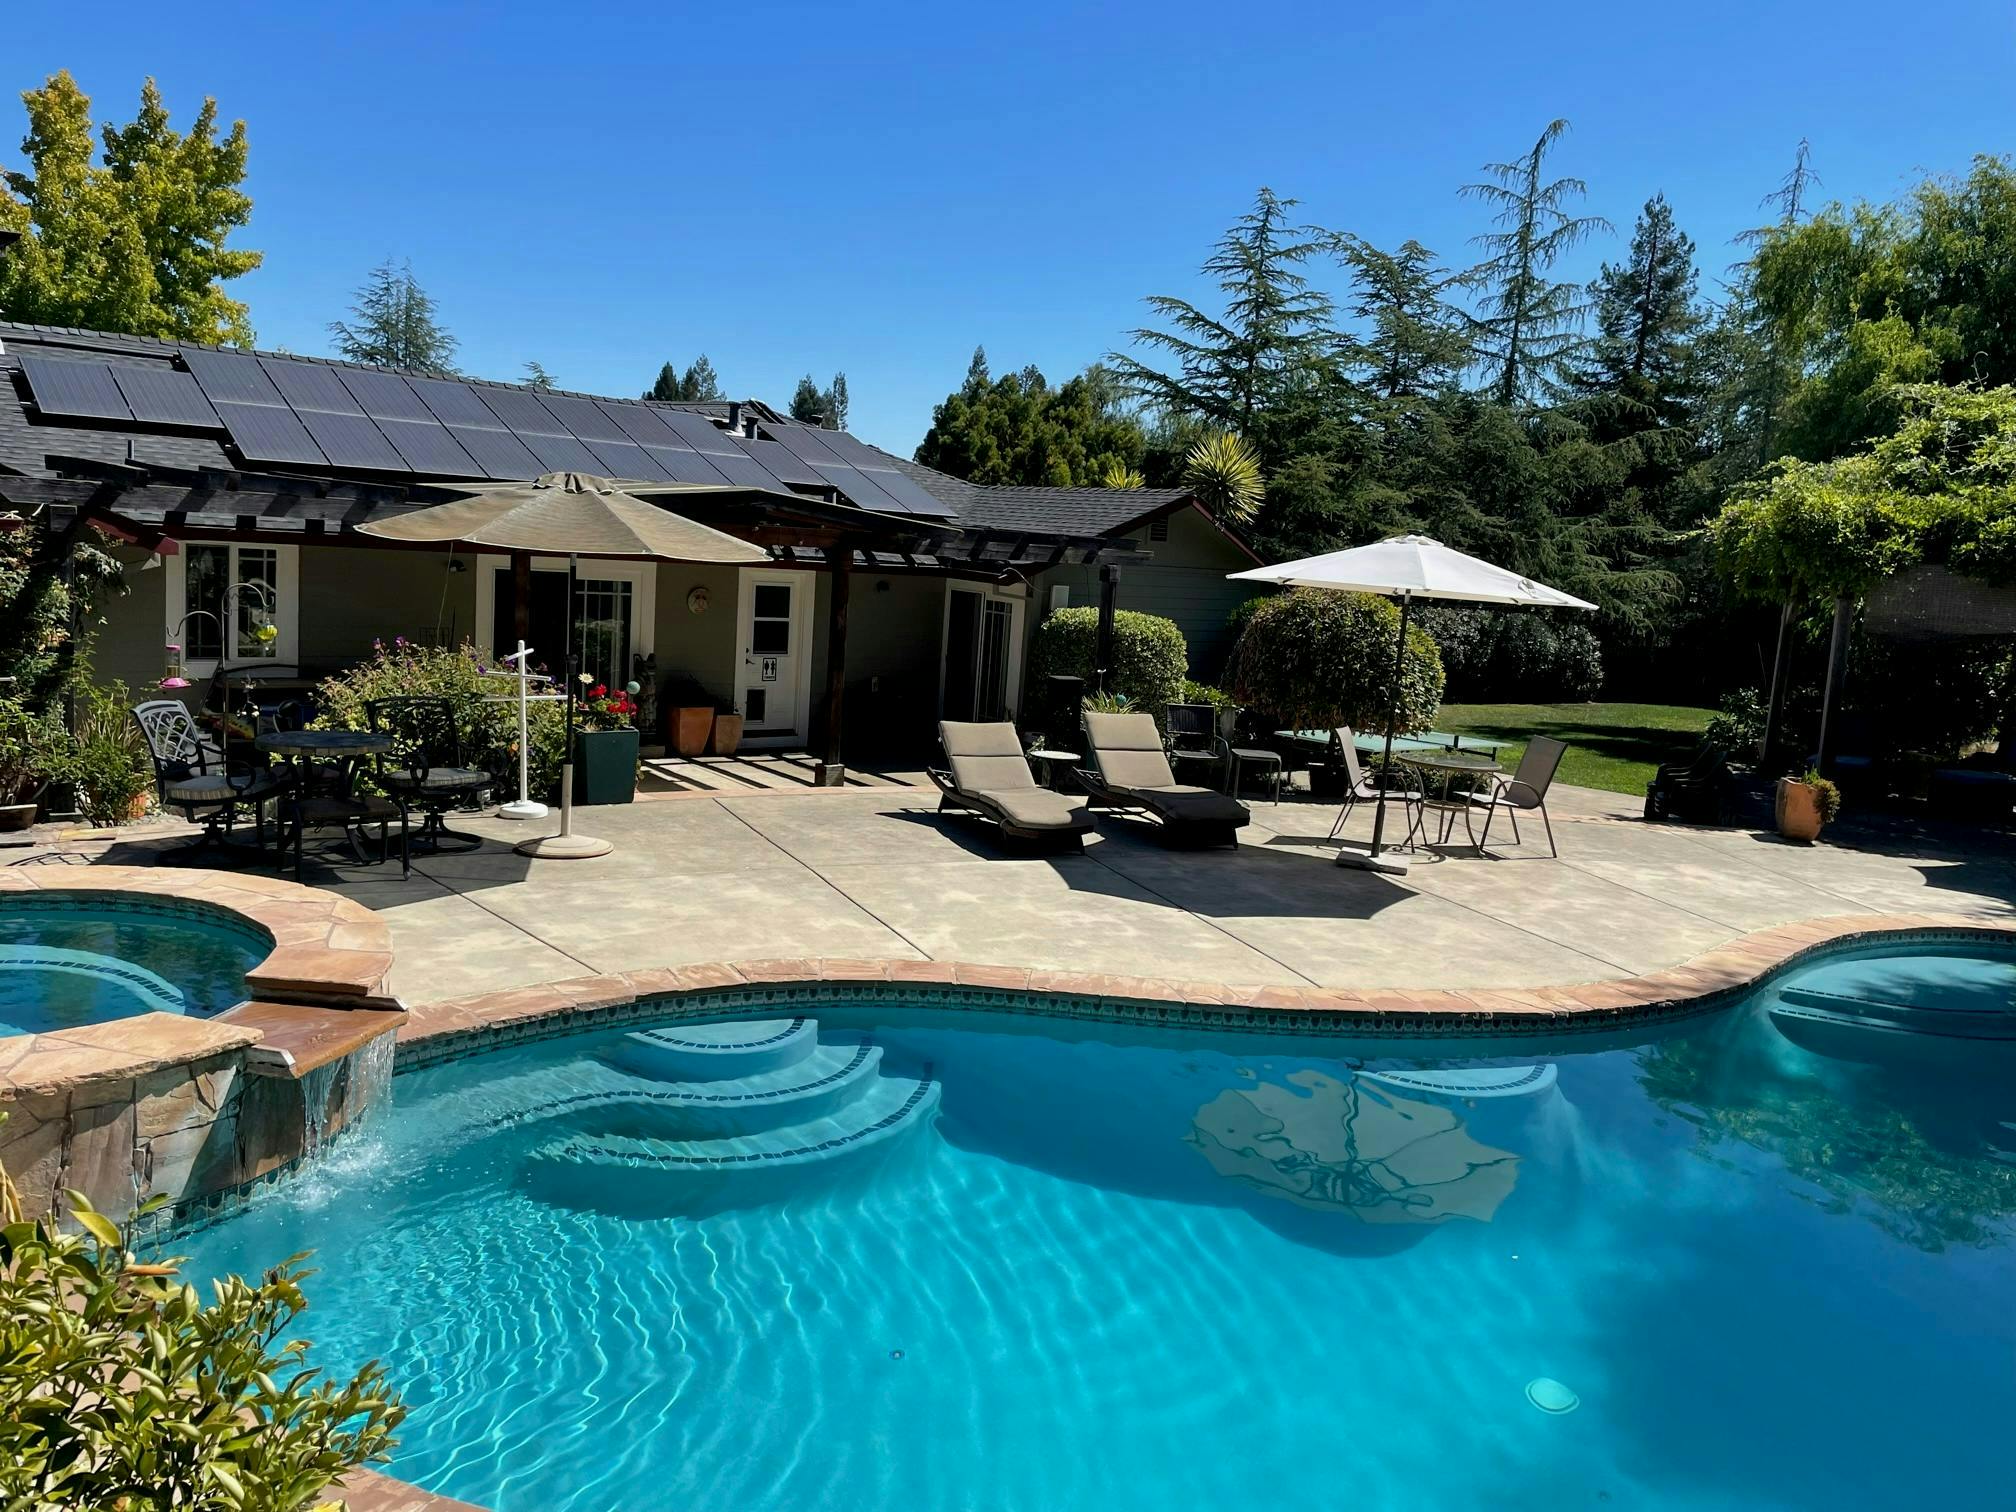 Kat's Splash: Lovely Wine Country Pool & Private Yard